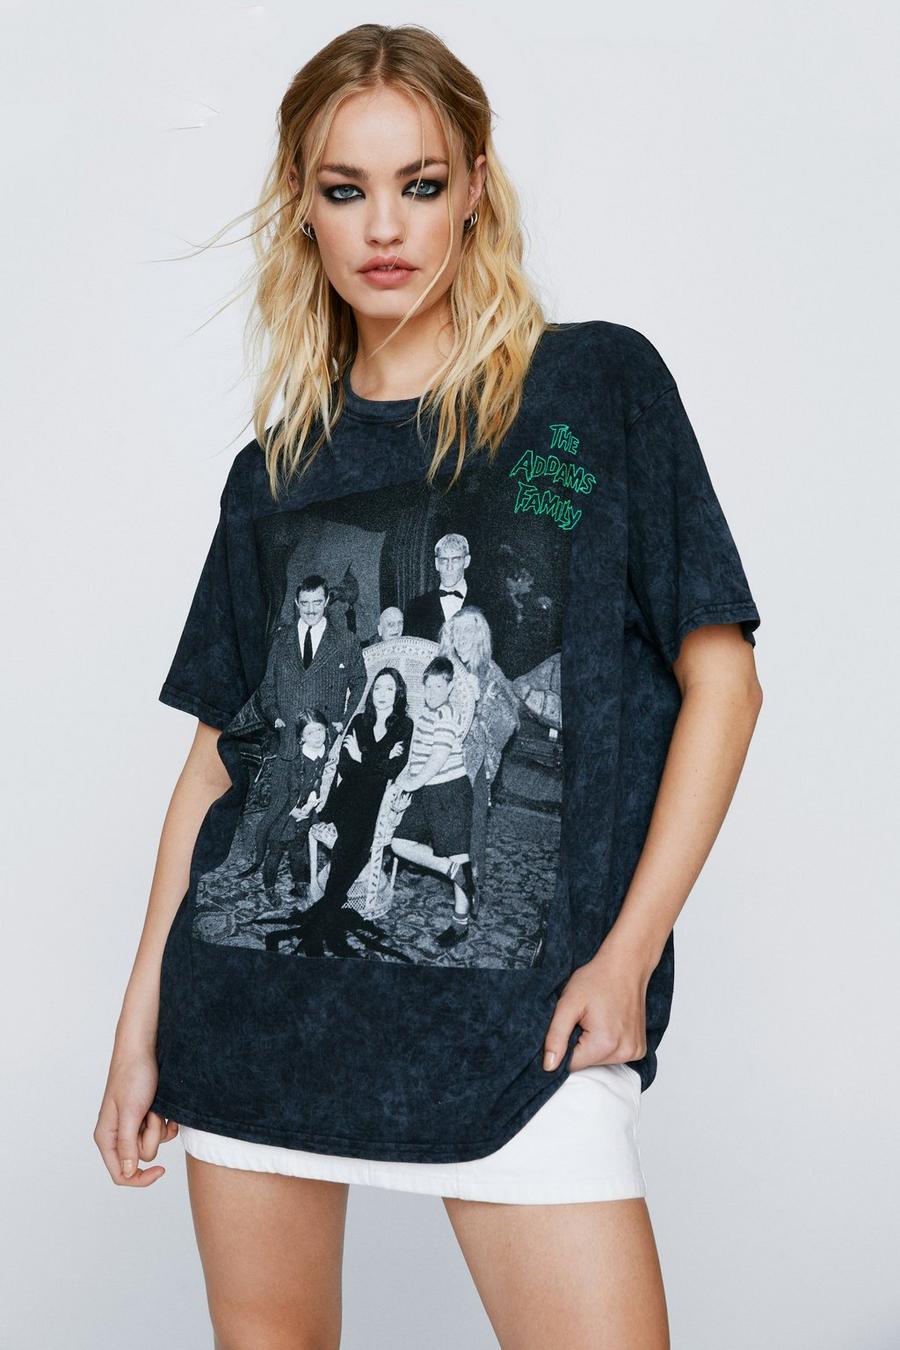 The Addams Family Oversized Graphic T-shirt